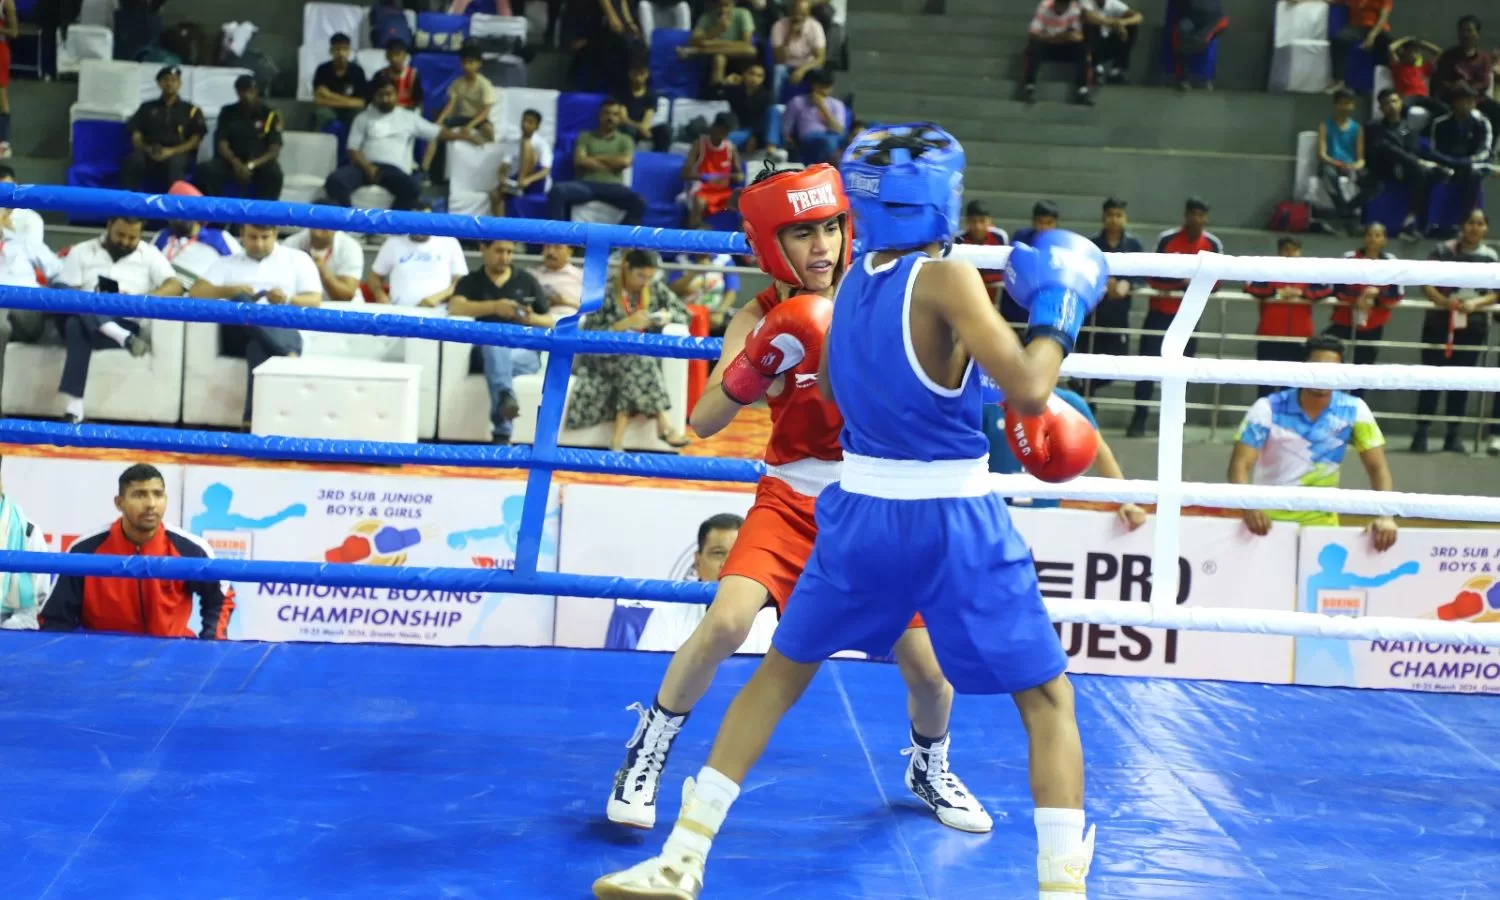 Haryana boxers confirm 19 medals at 3rd Sub Junior National Championship